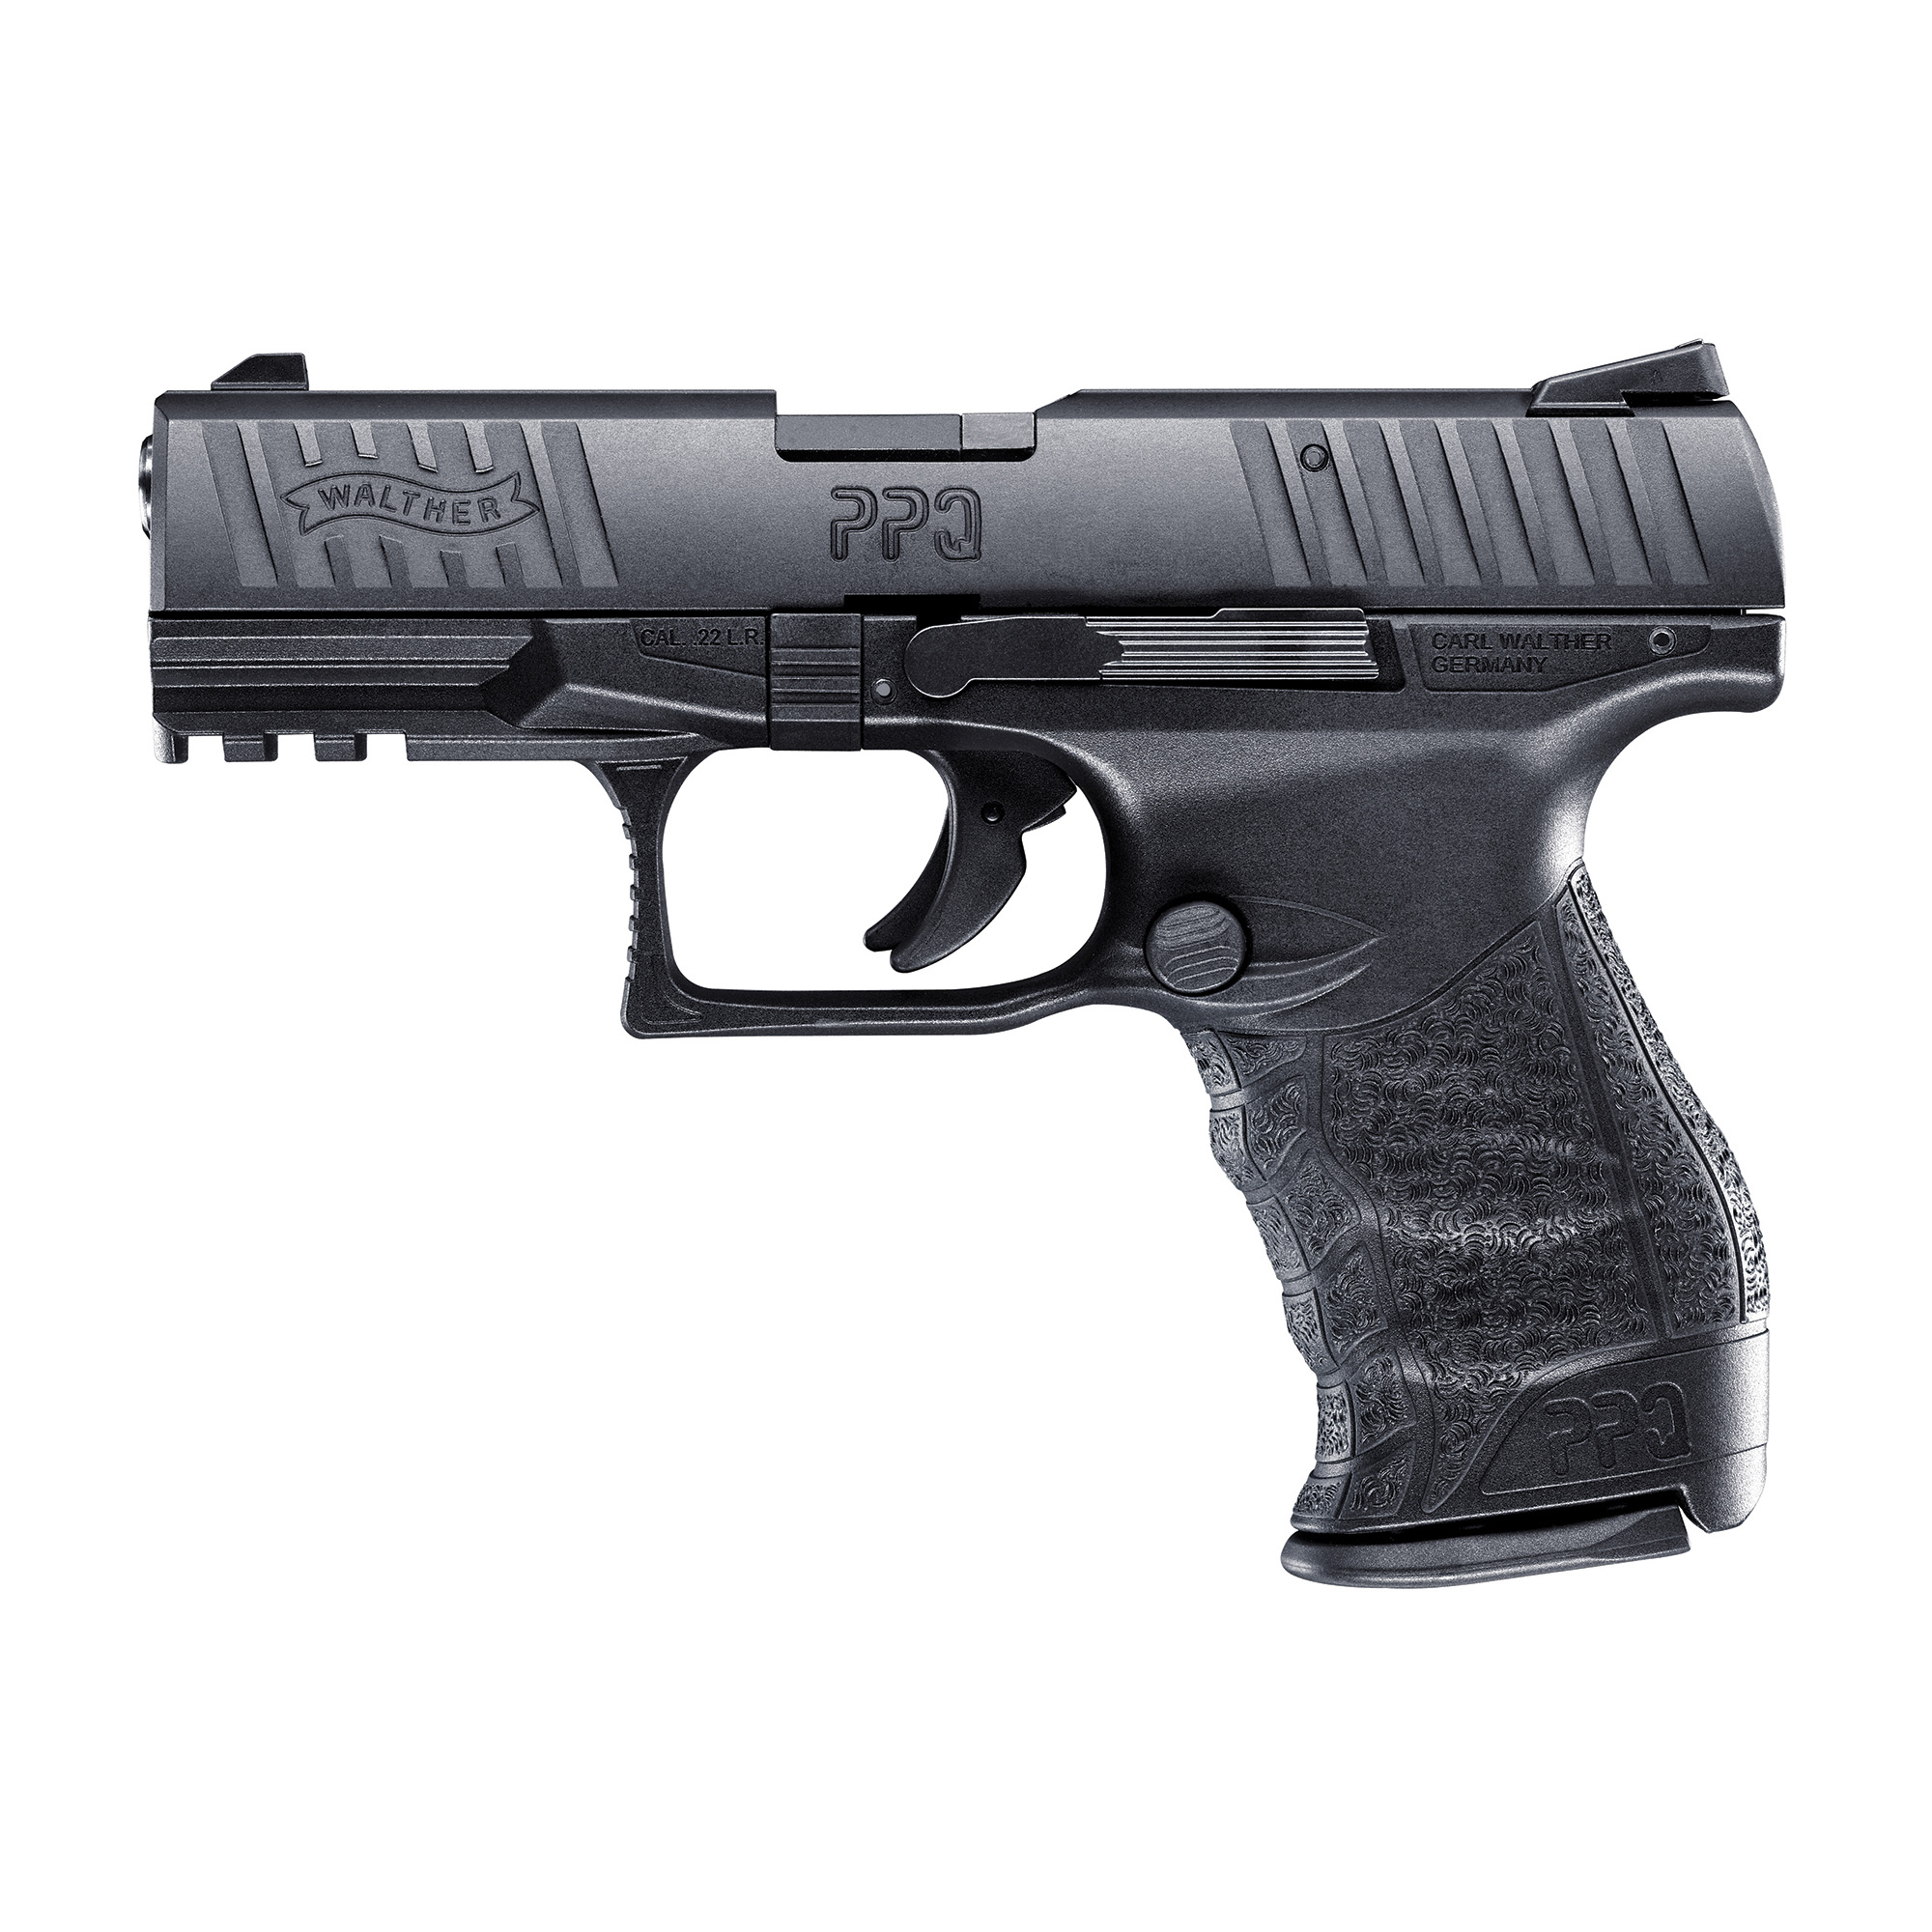 WALTHER PPQ M2 22LR 4 10RD BLK